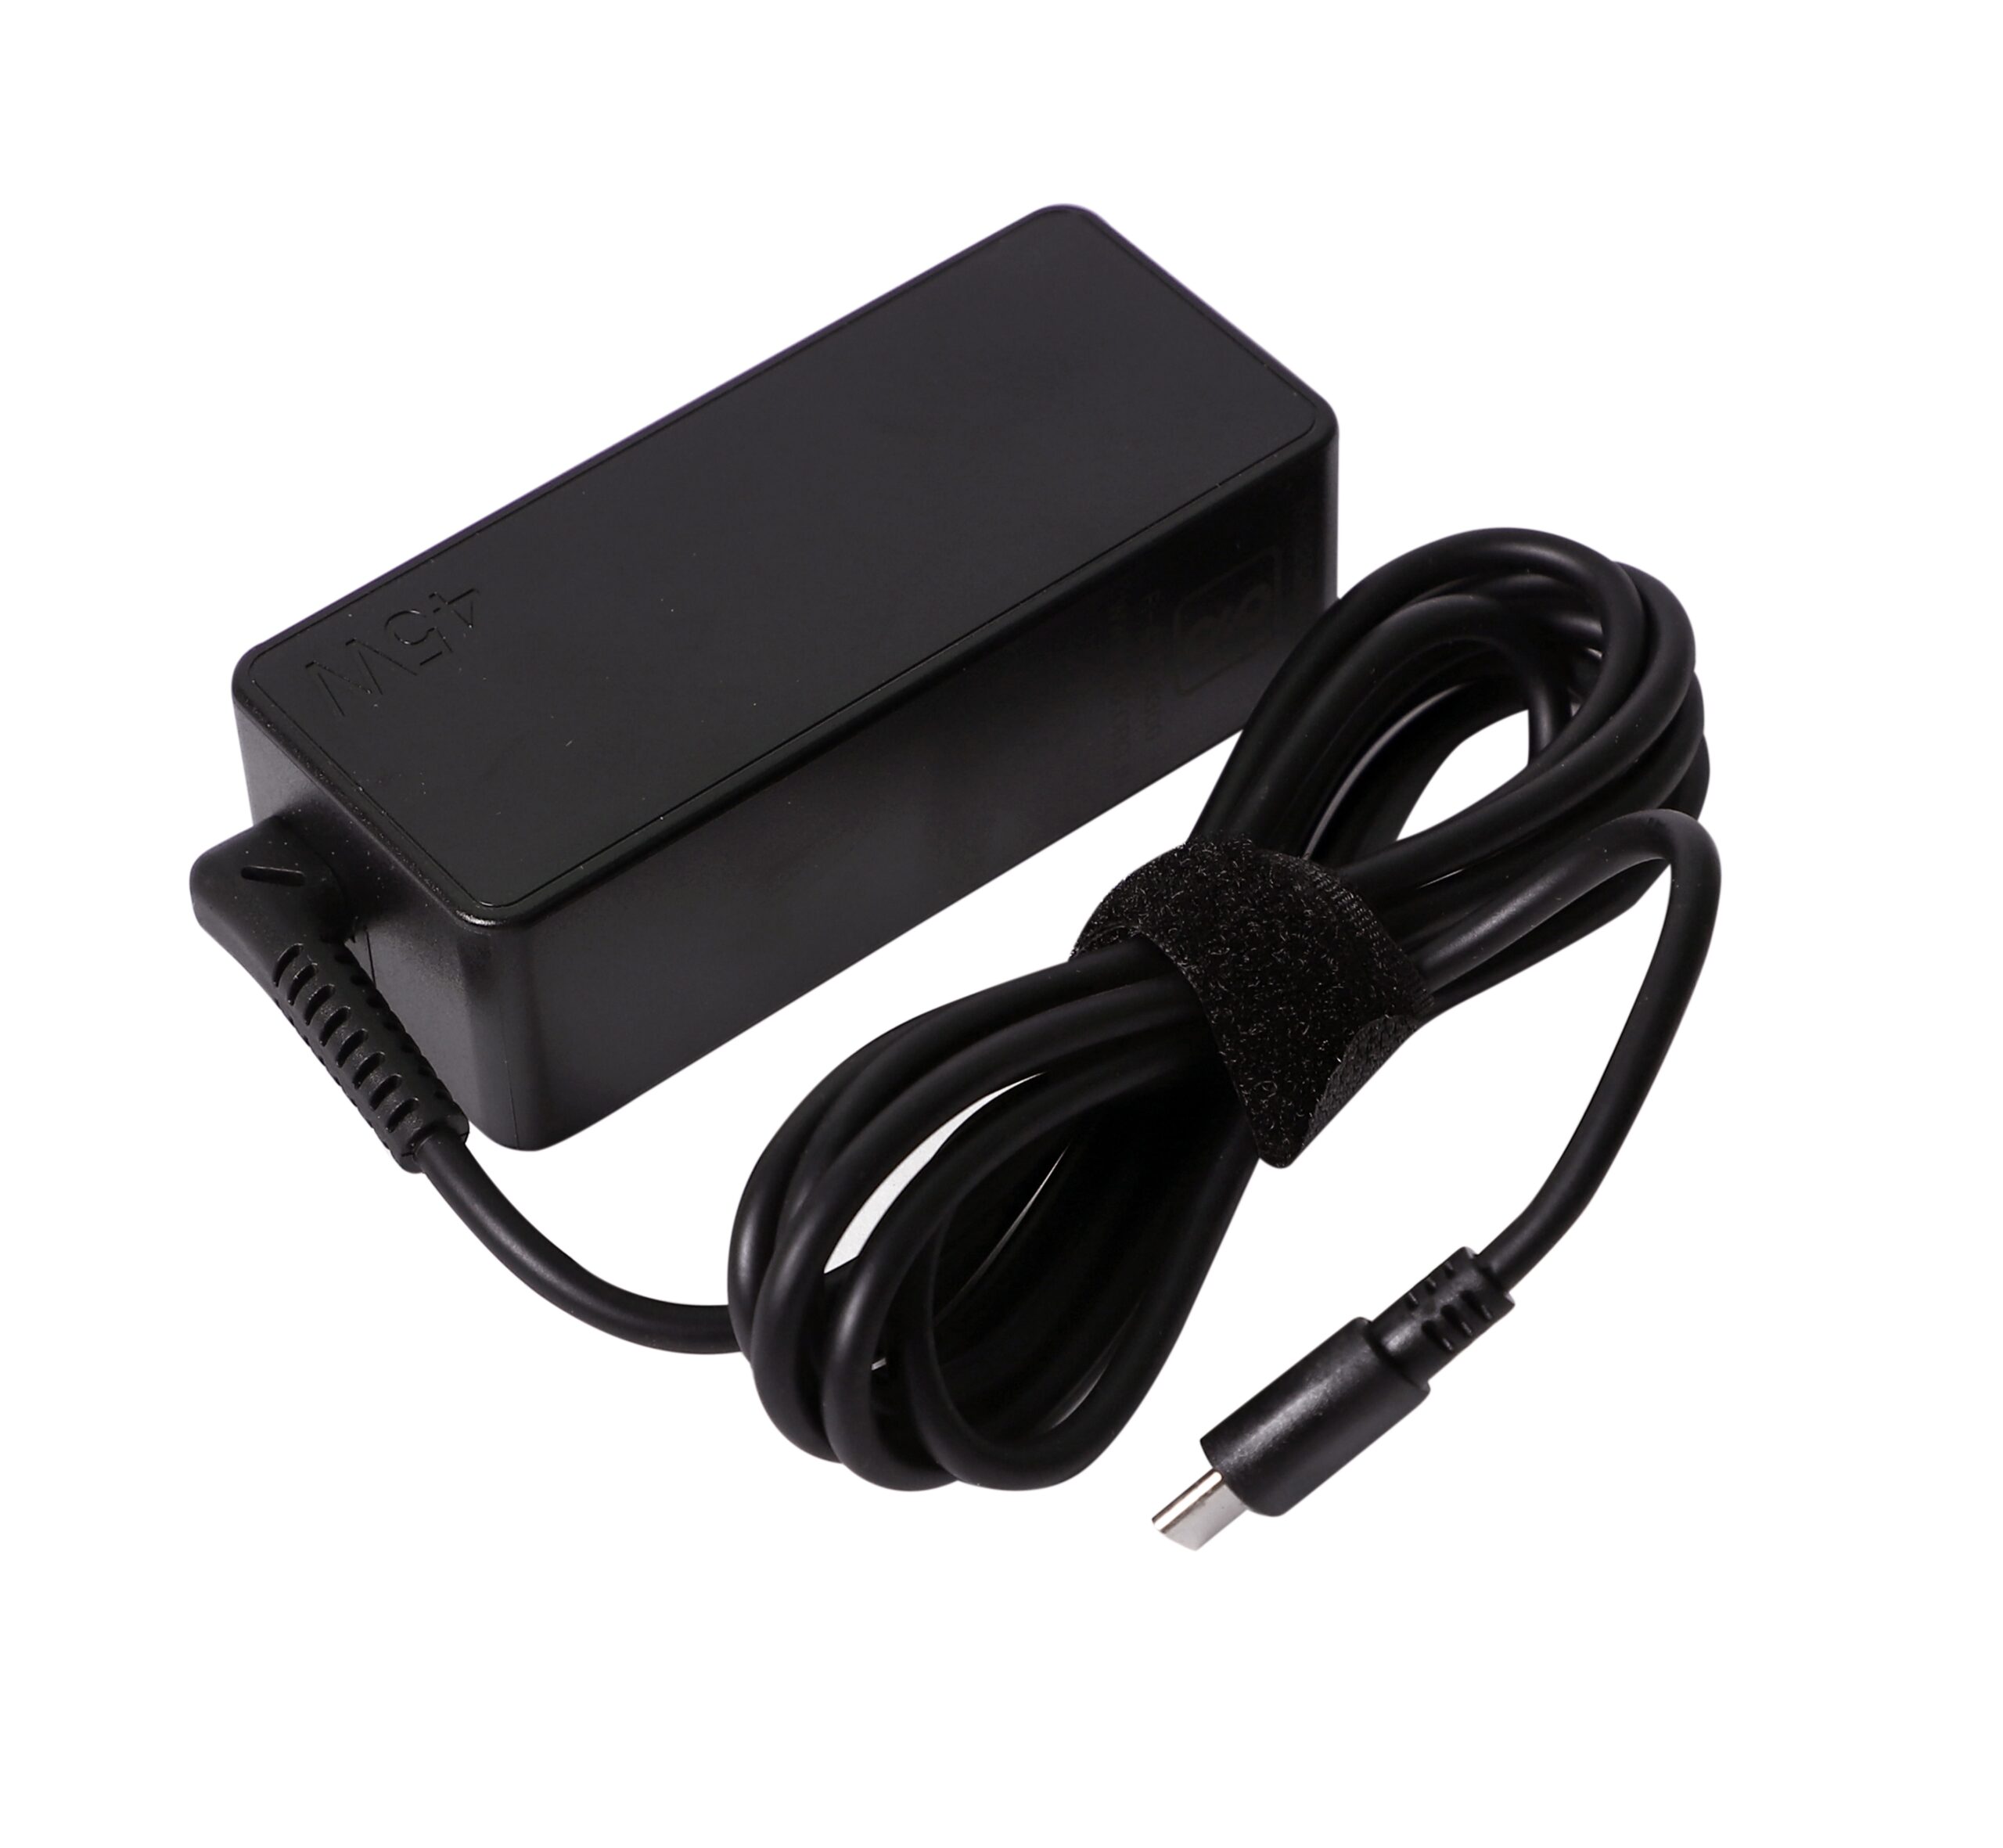 Techie Type-C 65W Universal Laptop Charger.